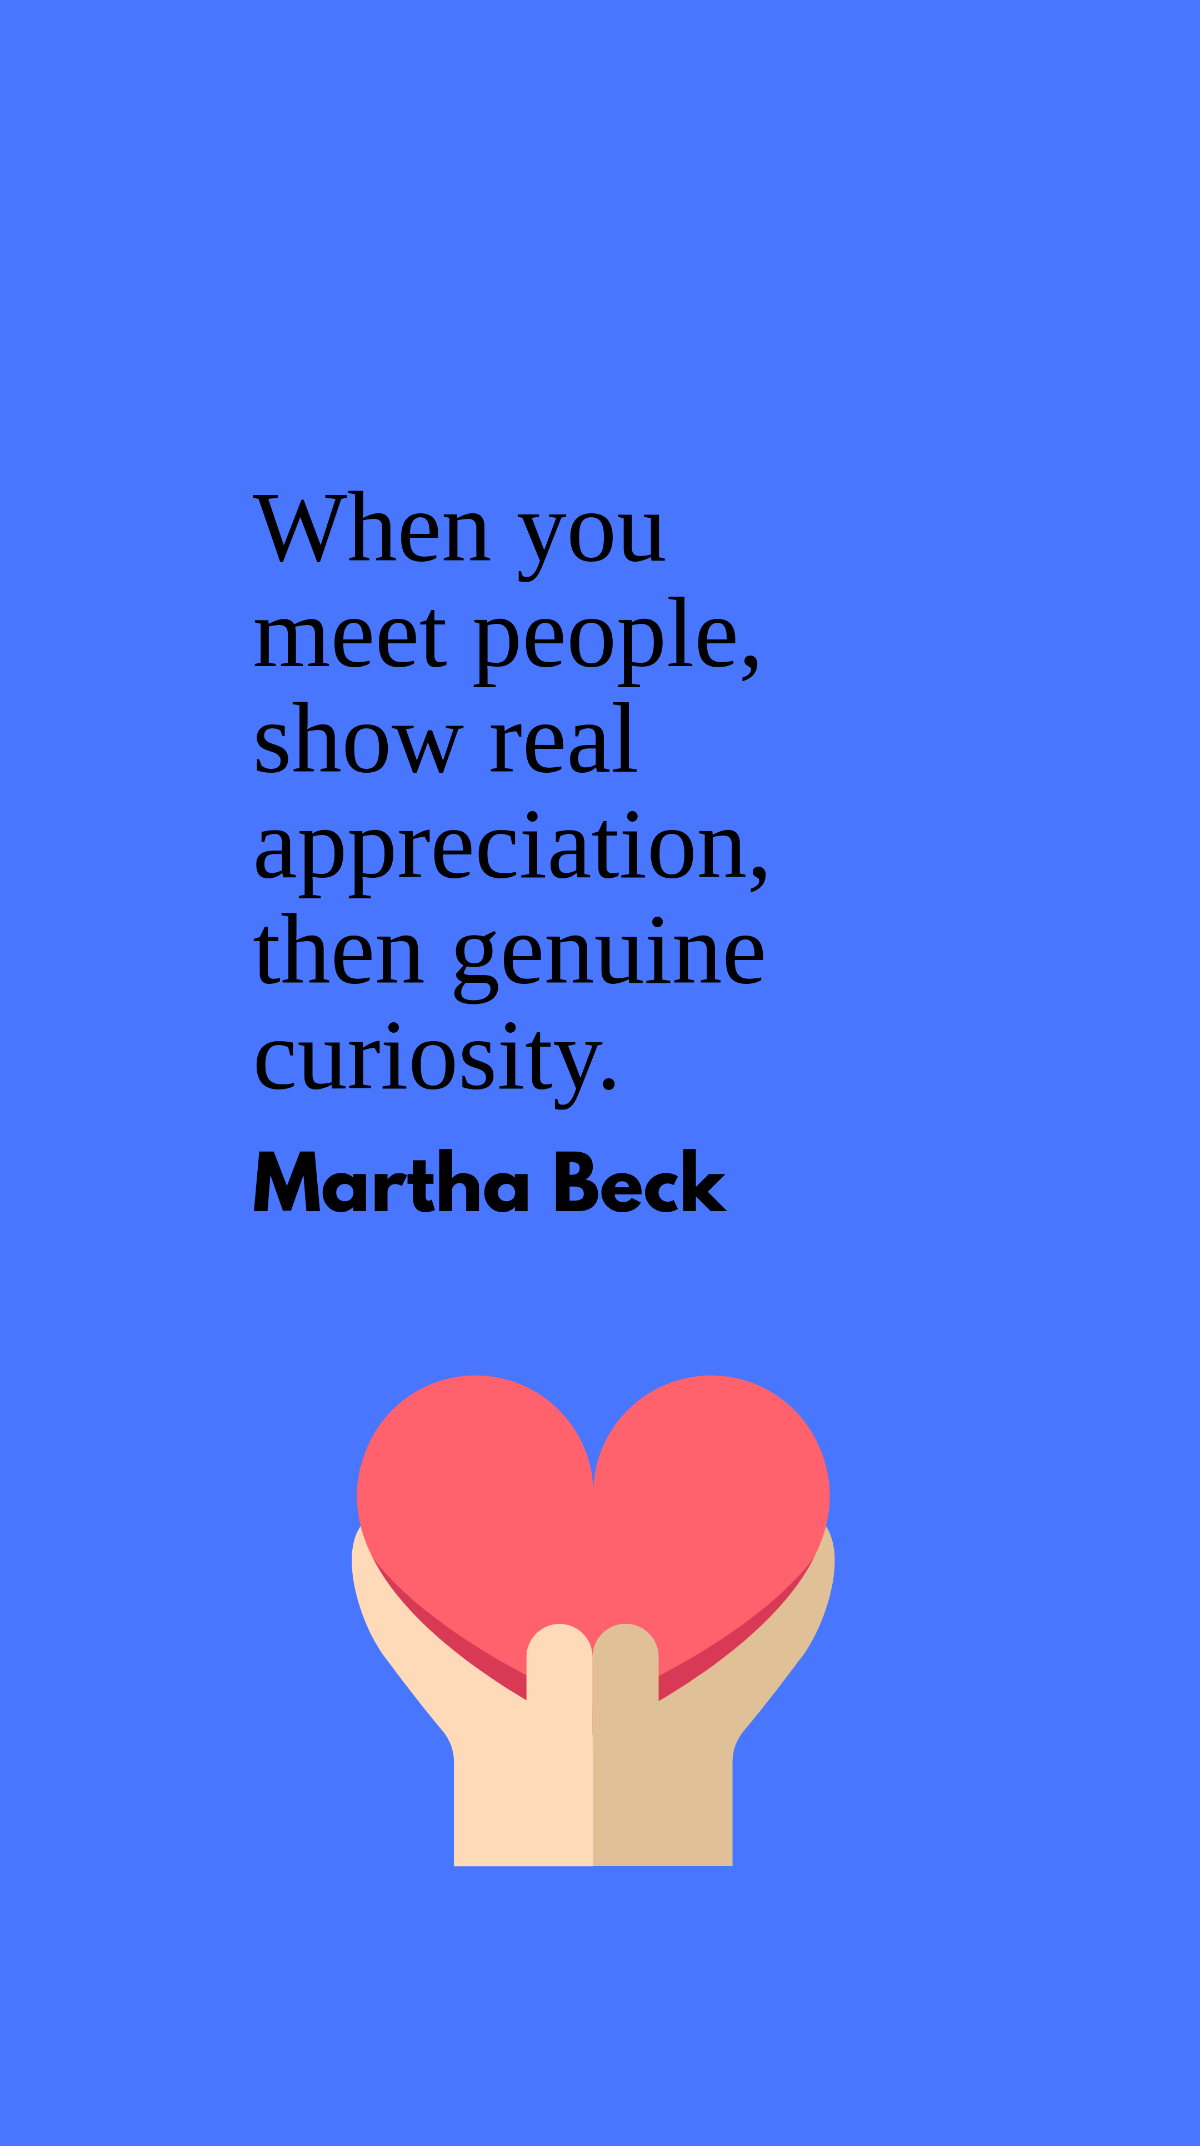 Martha Beck - When you meet people, show real appreciation, then genuine curiosity.